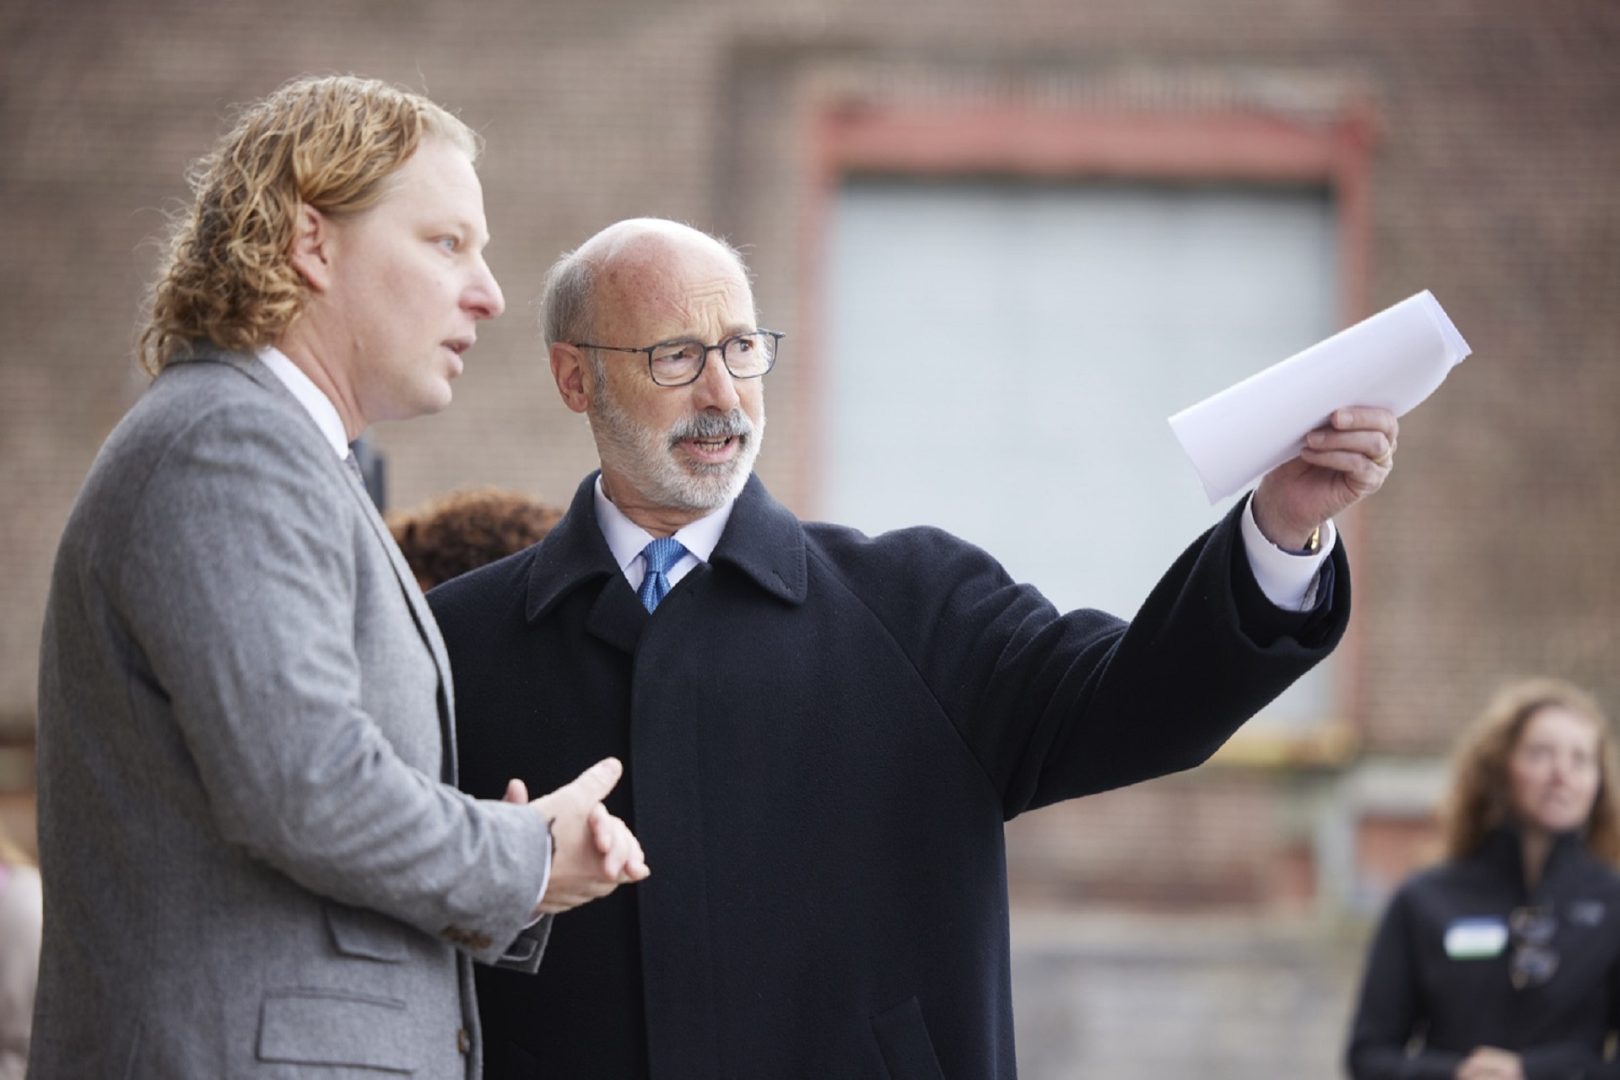 Pennsylvania Governor Tom Wolf speaking with Kevin Schreiber.Governor Tom Wolf will held a press conference to announce a major state investment in the Codorus Greenway project to improve the economy and quality of life in York City and the surrounding communities. The governor was joined by elected officials and community leaders.  York, PA - December 5, 2021